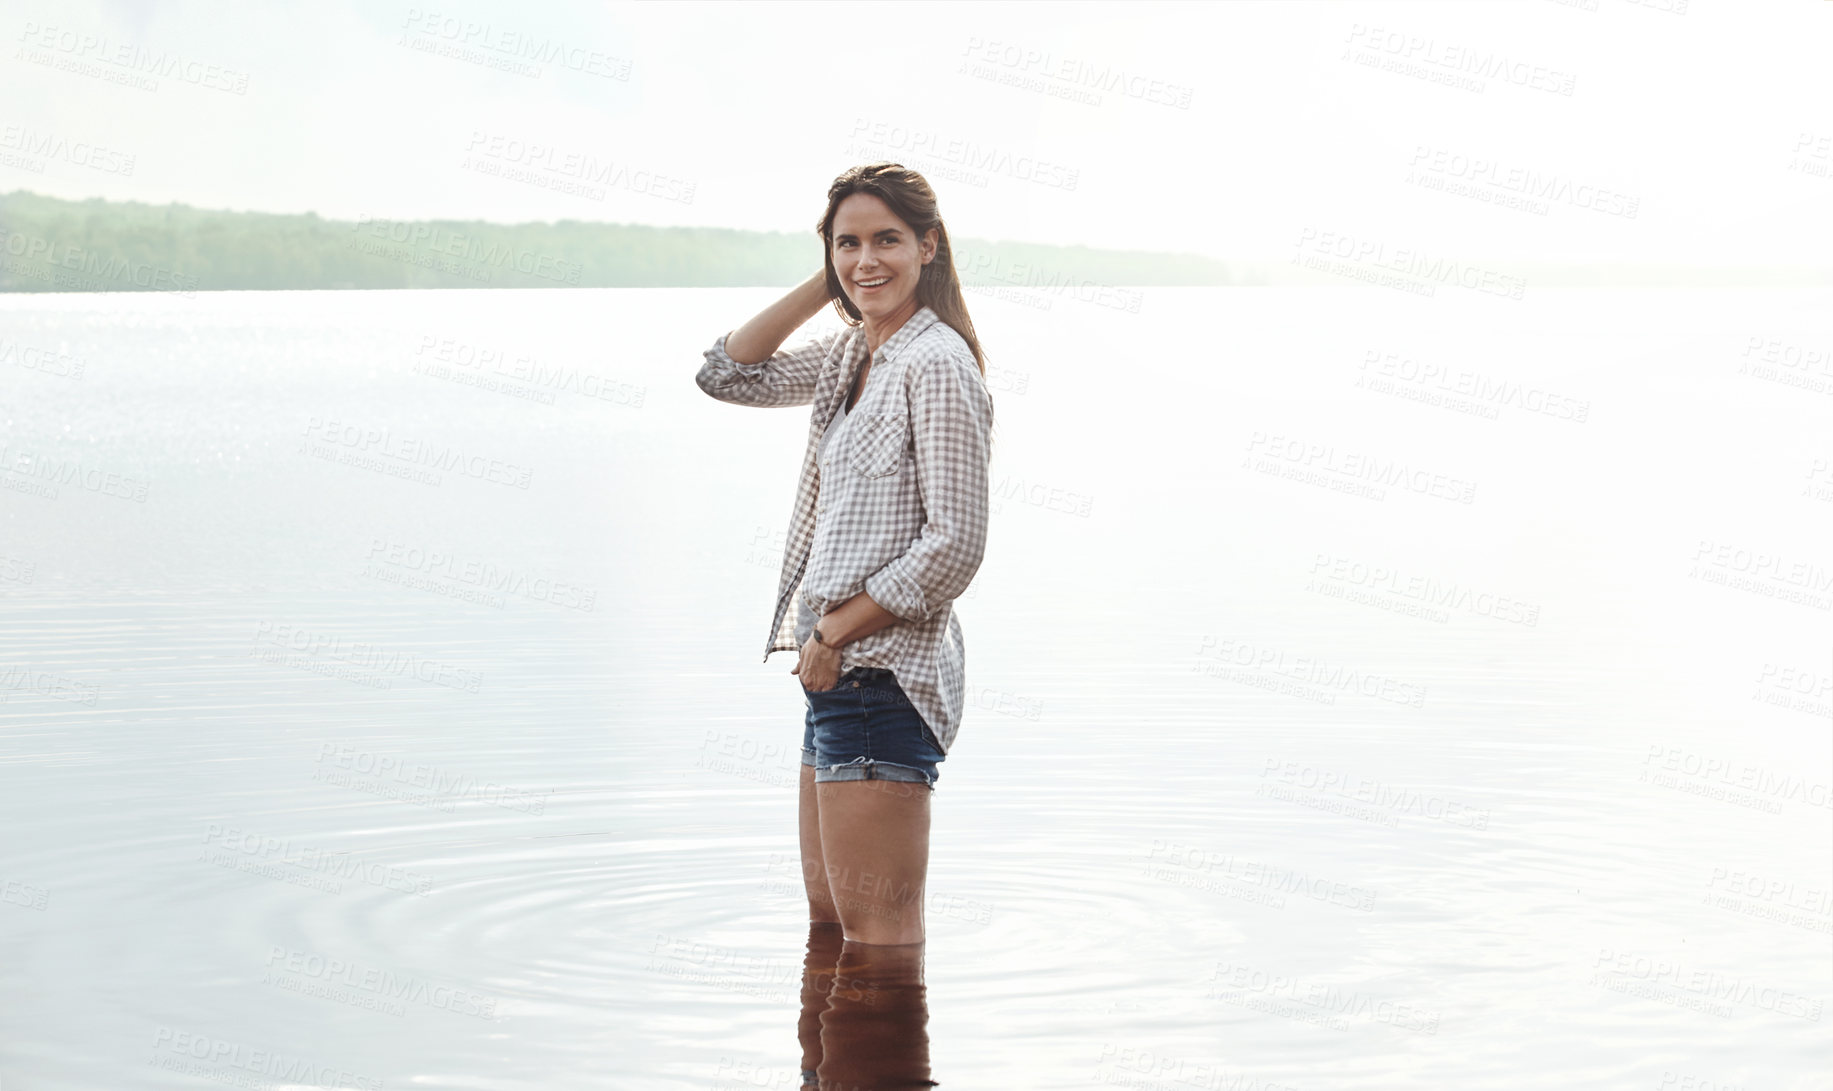 Buy stock photo Portrait of an attractive young woman standing in a lake